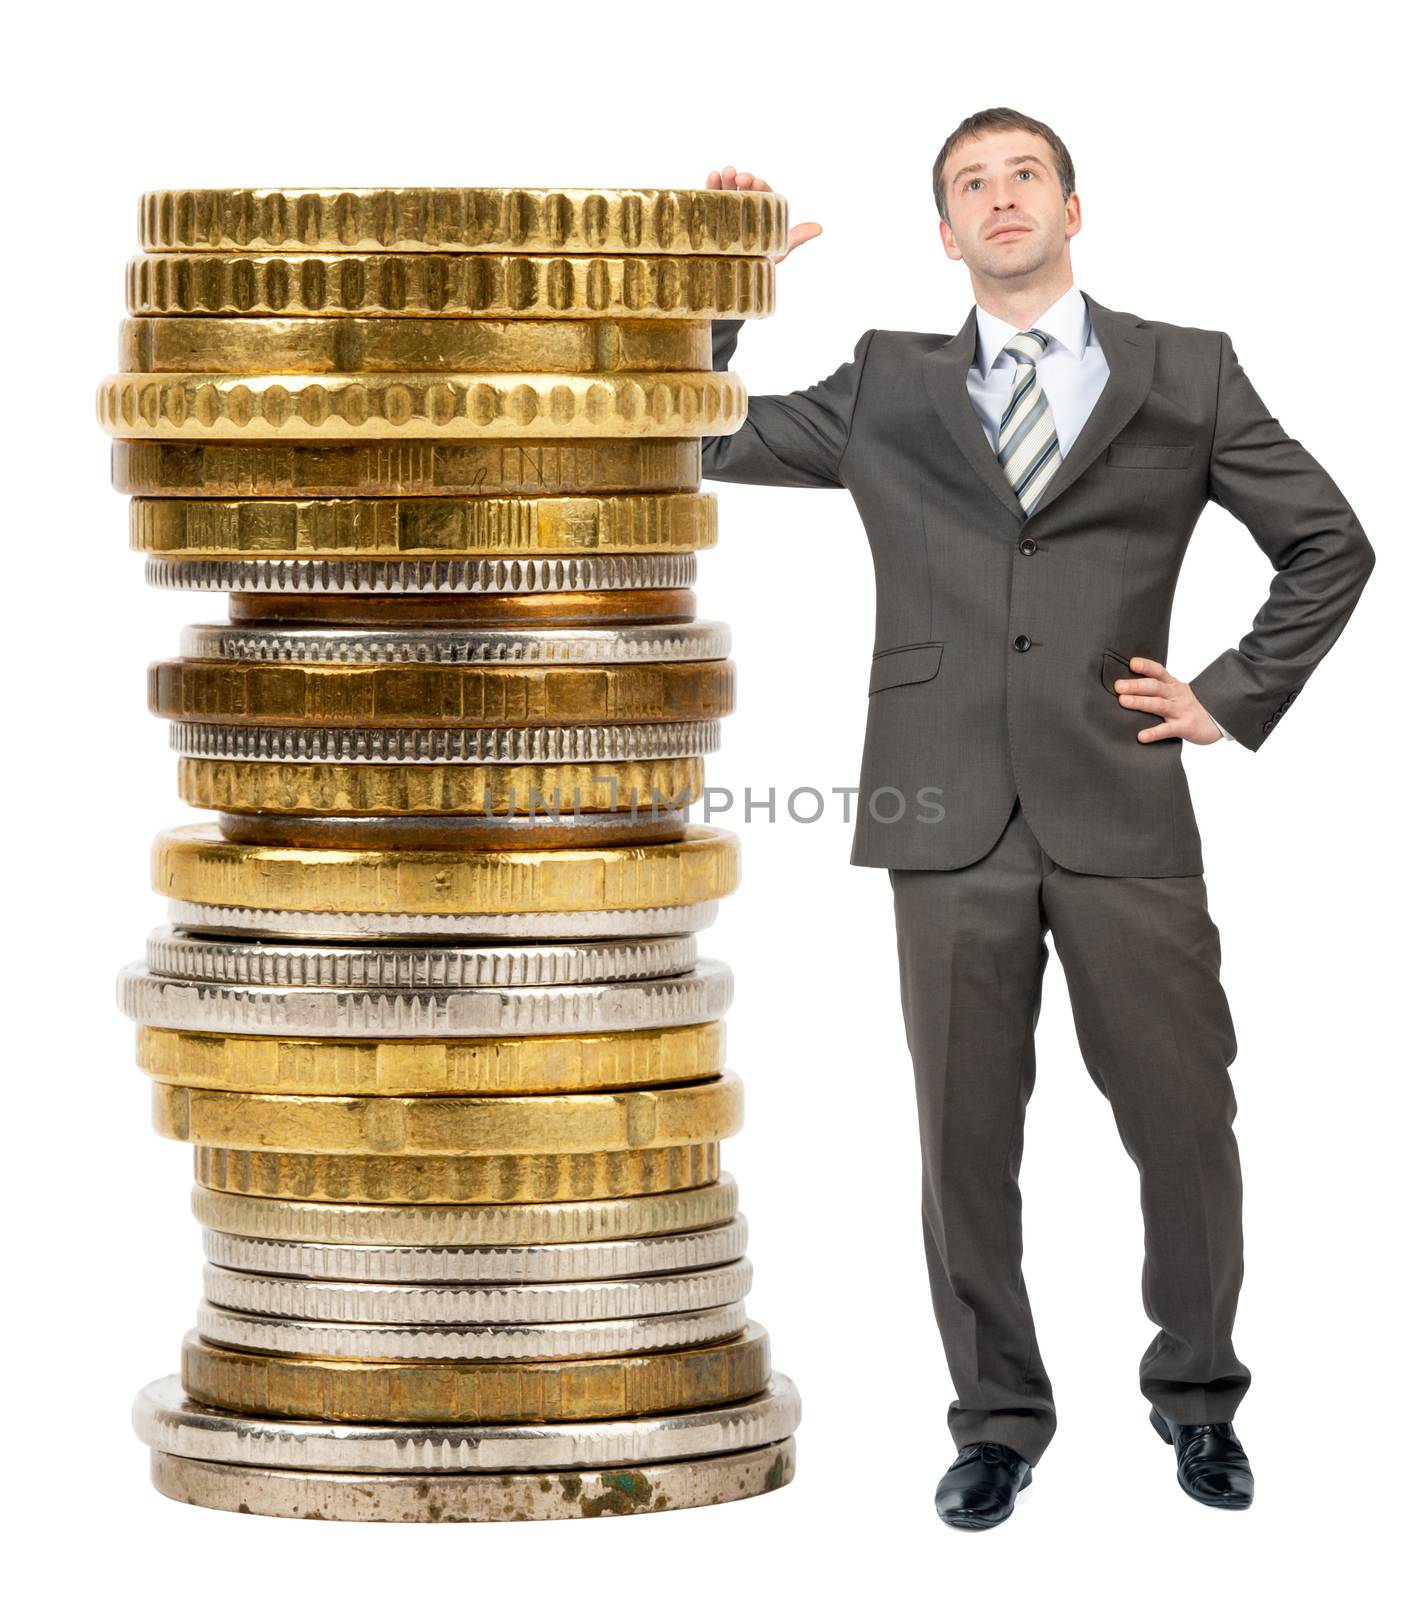 Businessman with big stack of coins isolated on white background